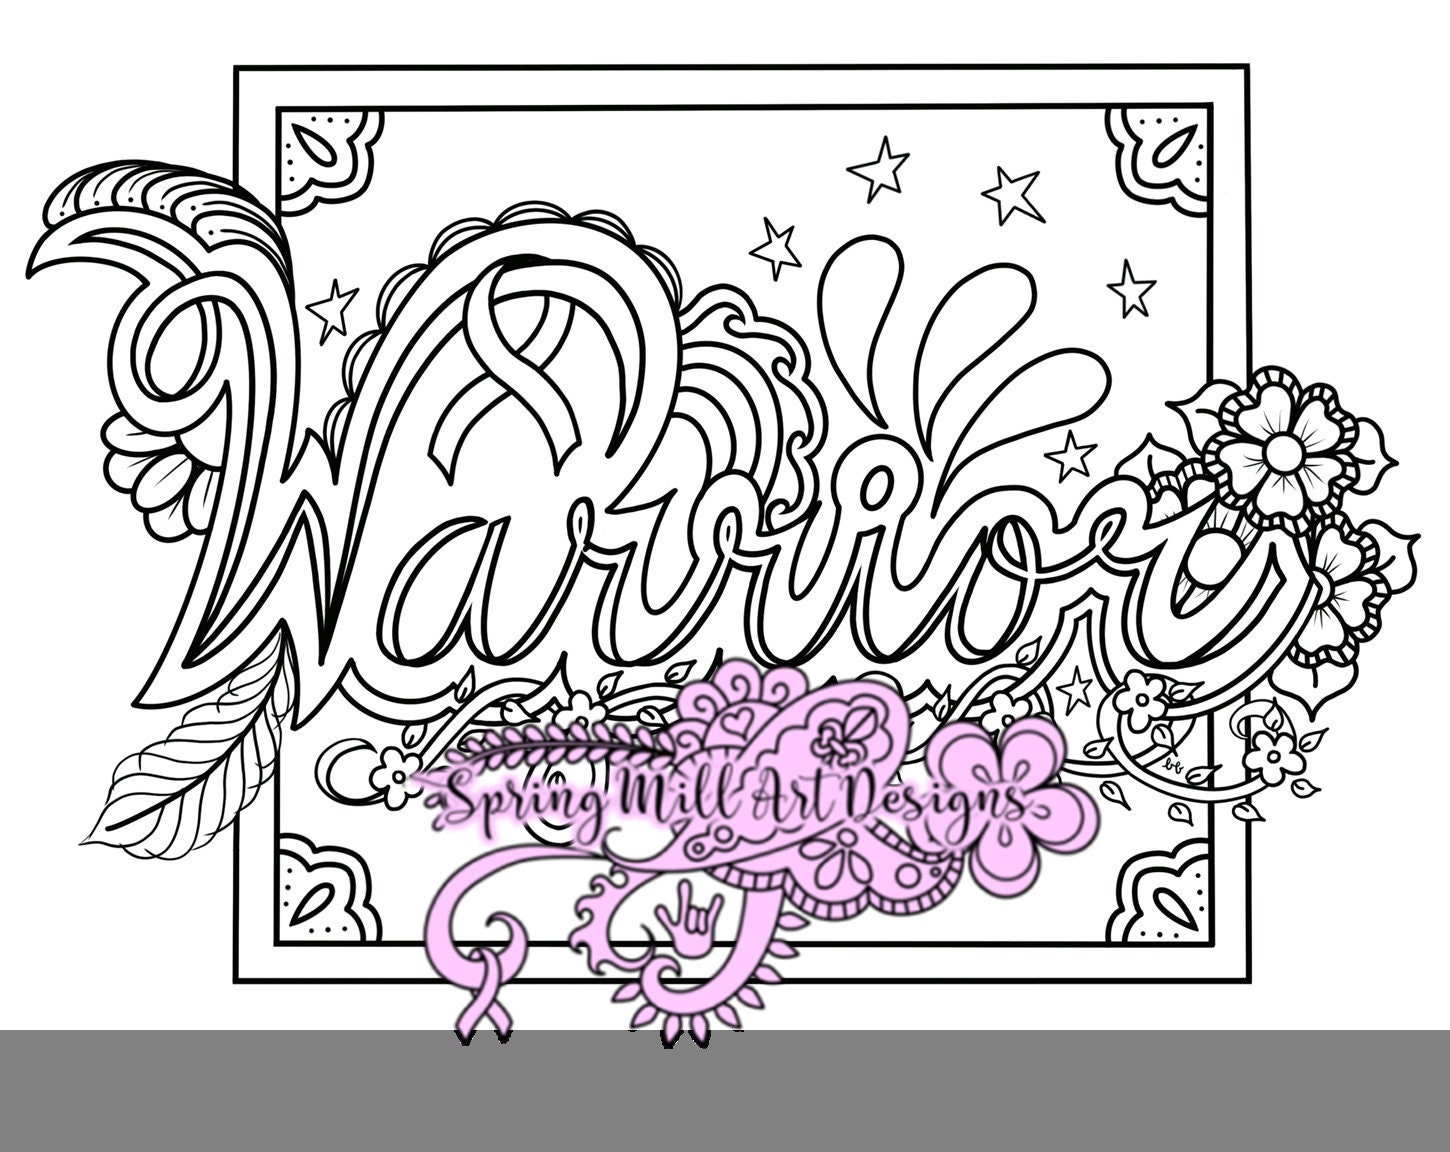 Warrior coloring page with ribbon for cancer awarenessprintable